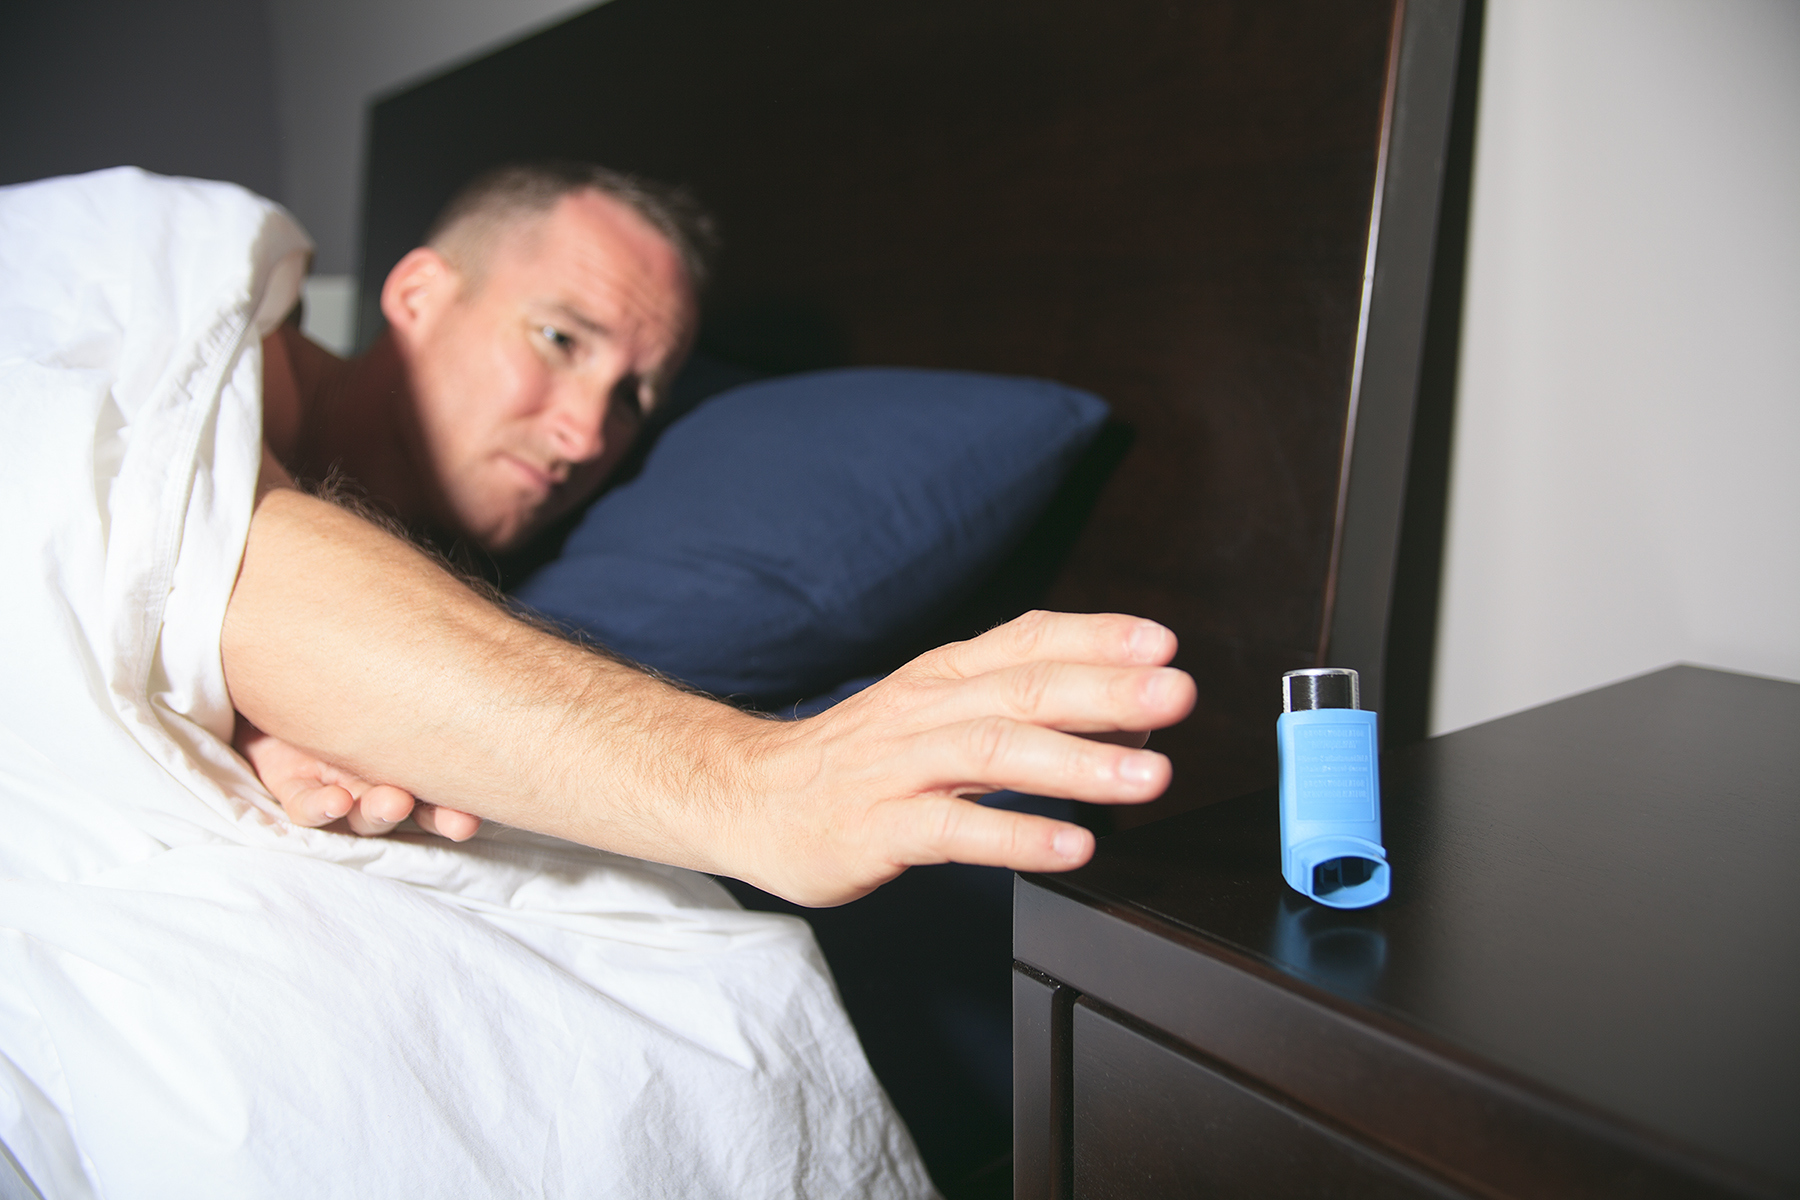 Study Suggests Poor Sleep Can Add to Genetic Risk for Asthma